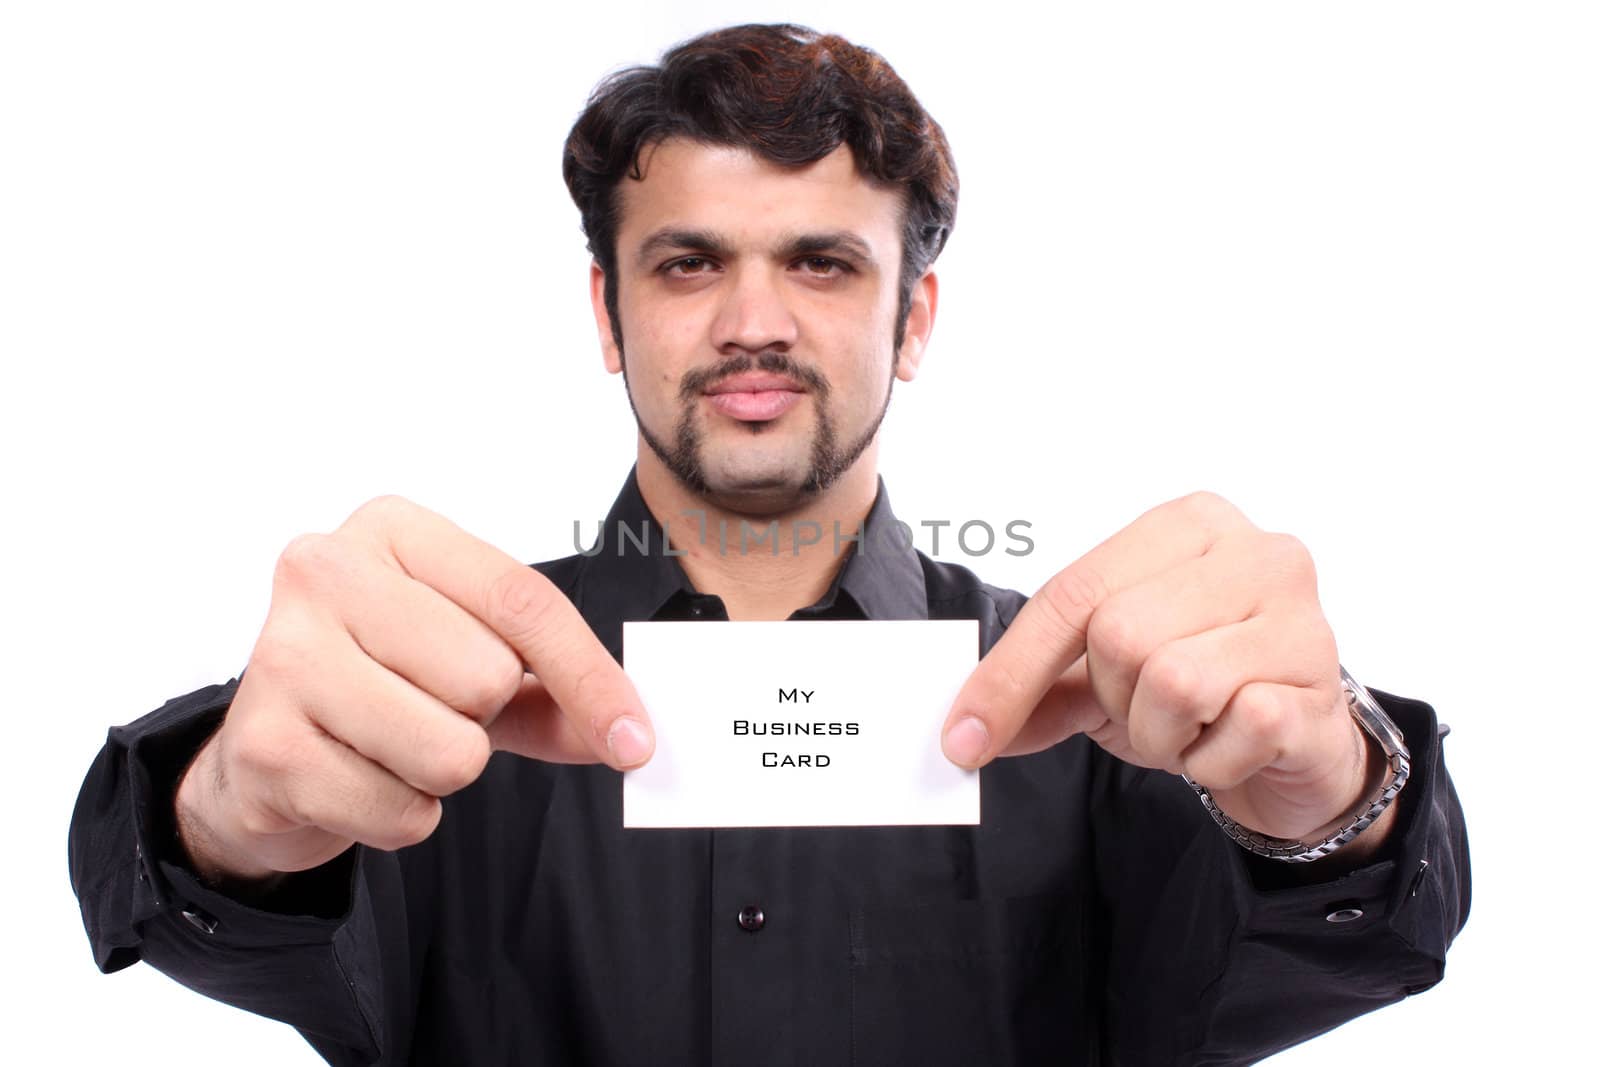 A proud Indian man showing his new business card, on white studio background. Focus on hands and the card.